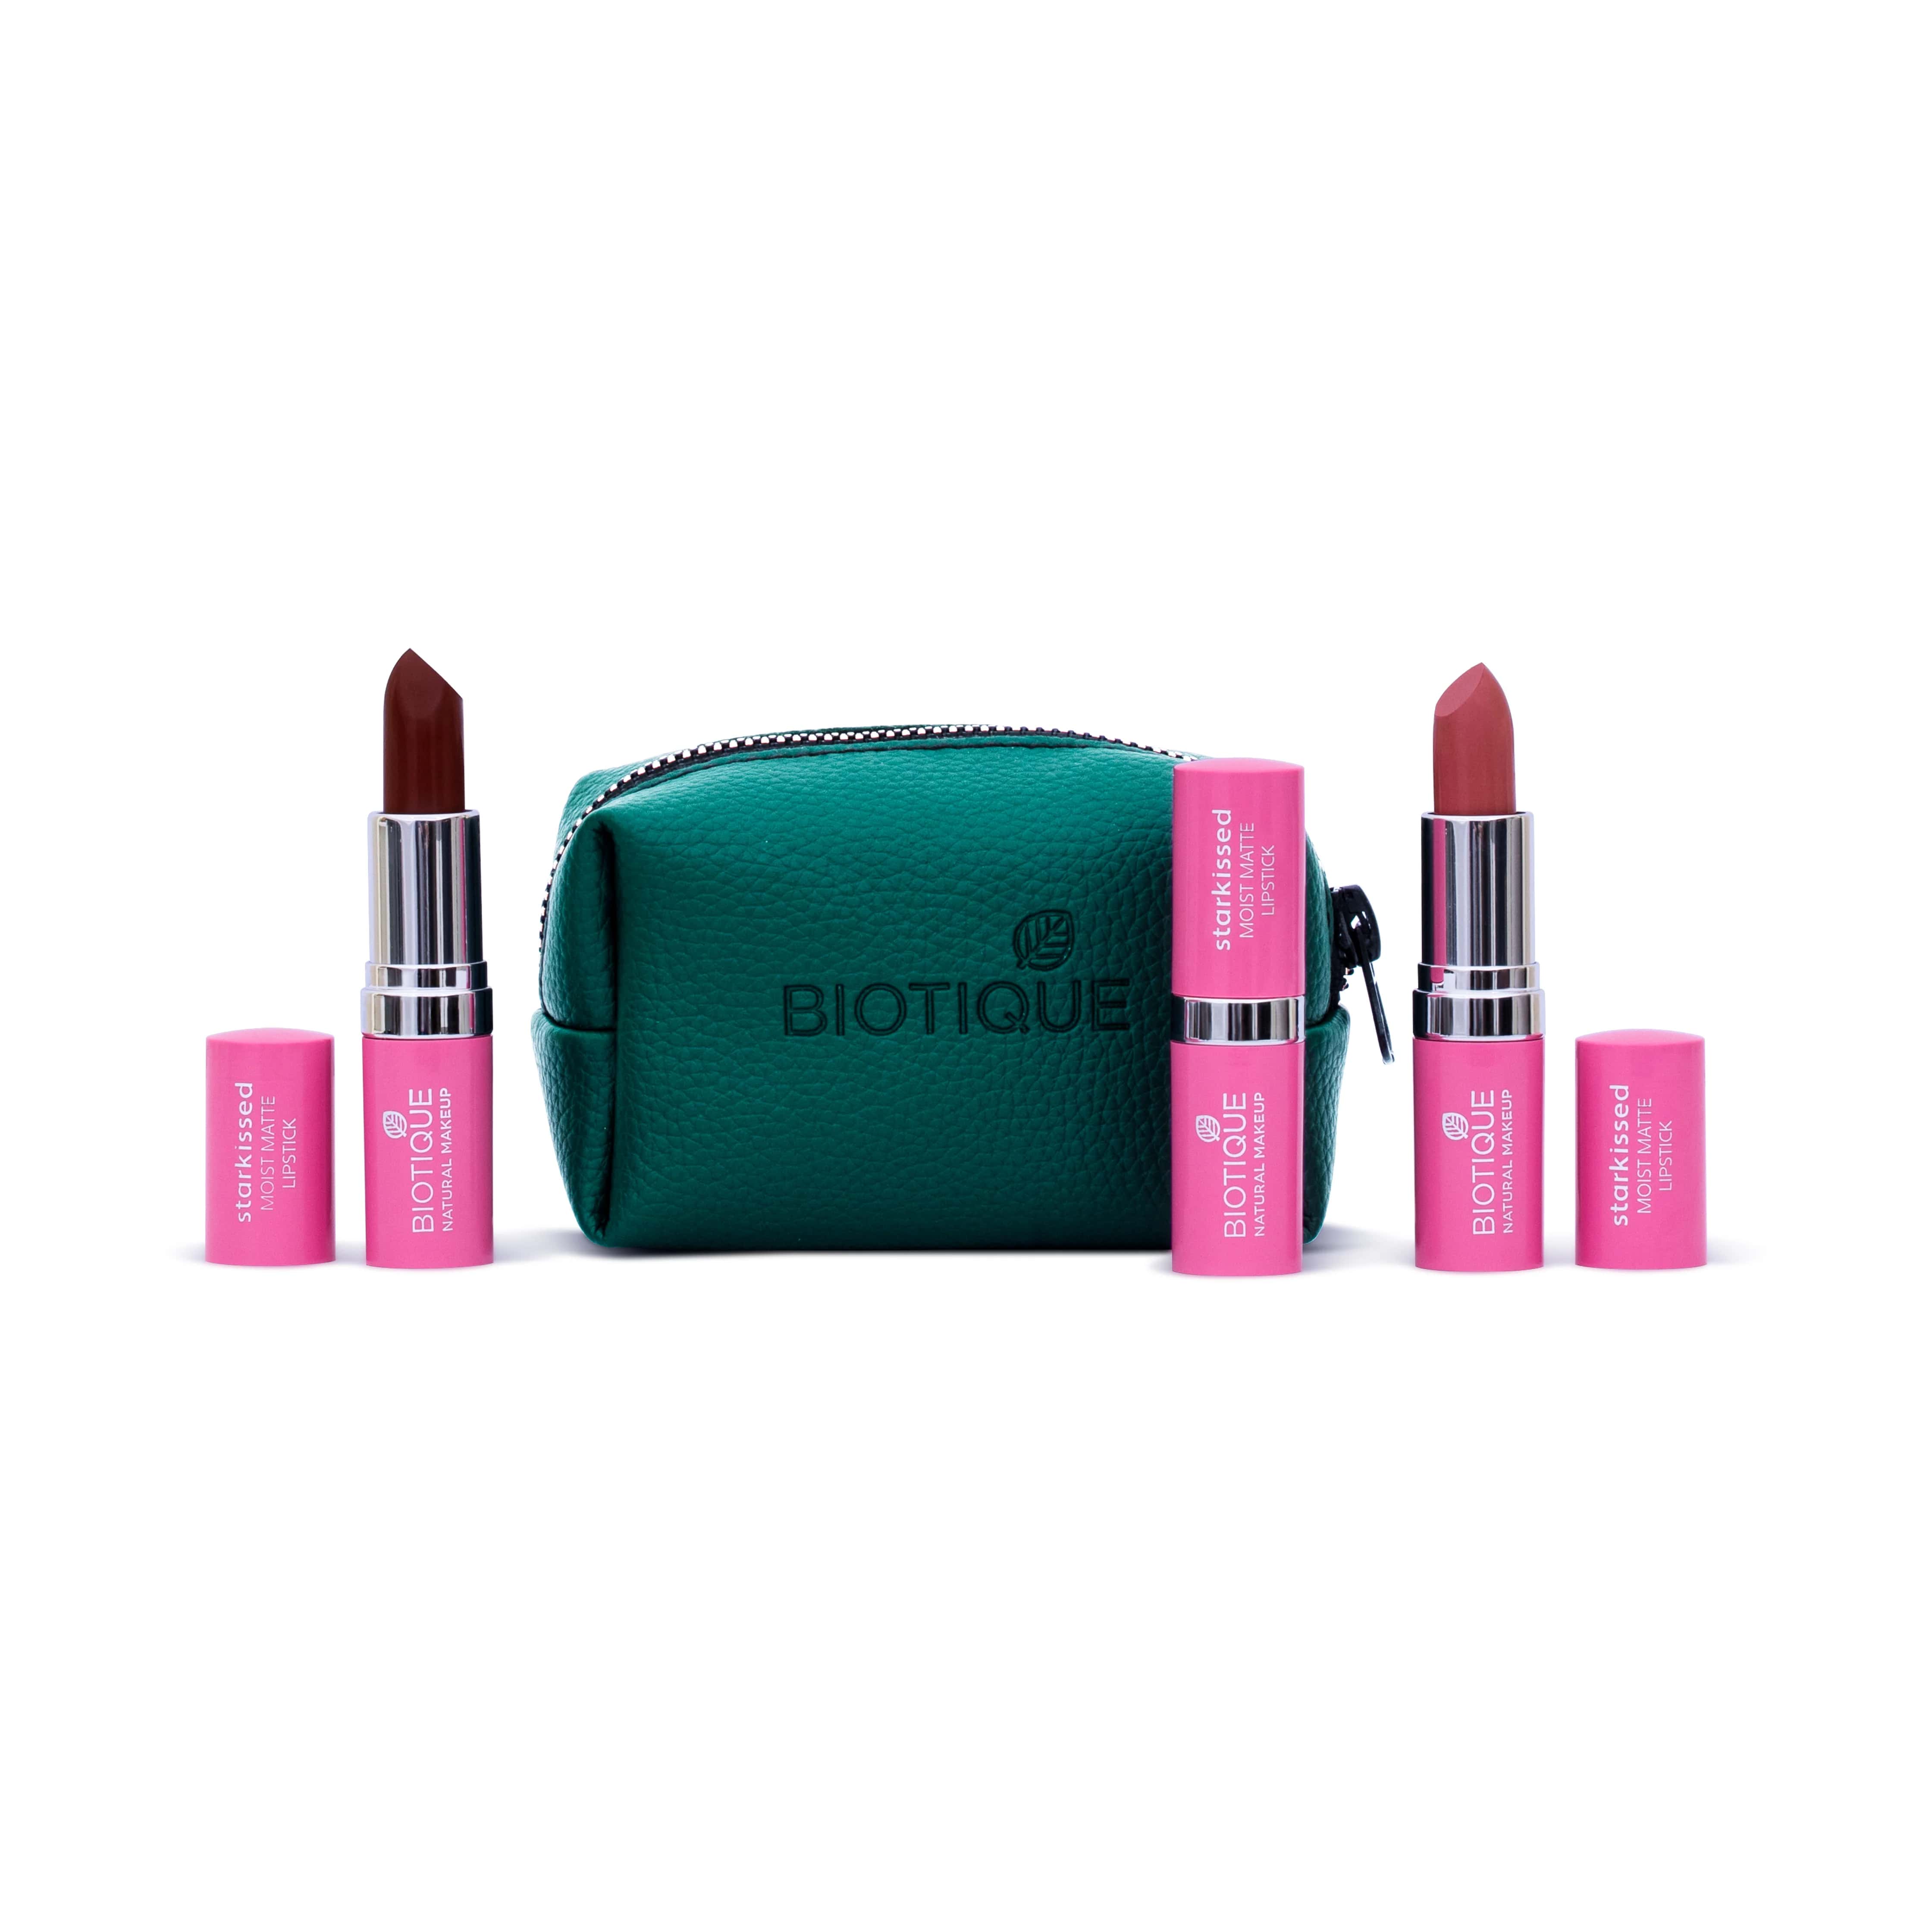 Biotique Lipstick Pack Of 3: Nude Edition With Lipstick Case